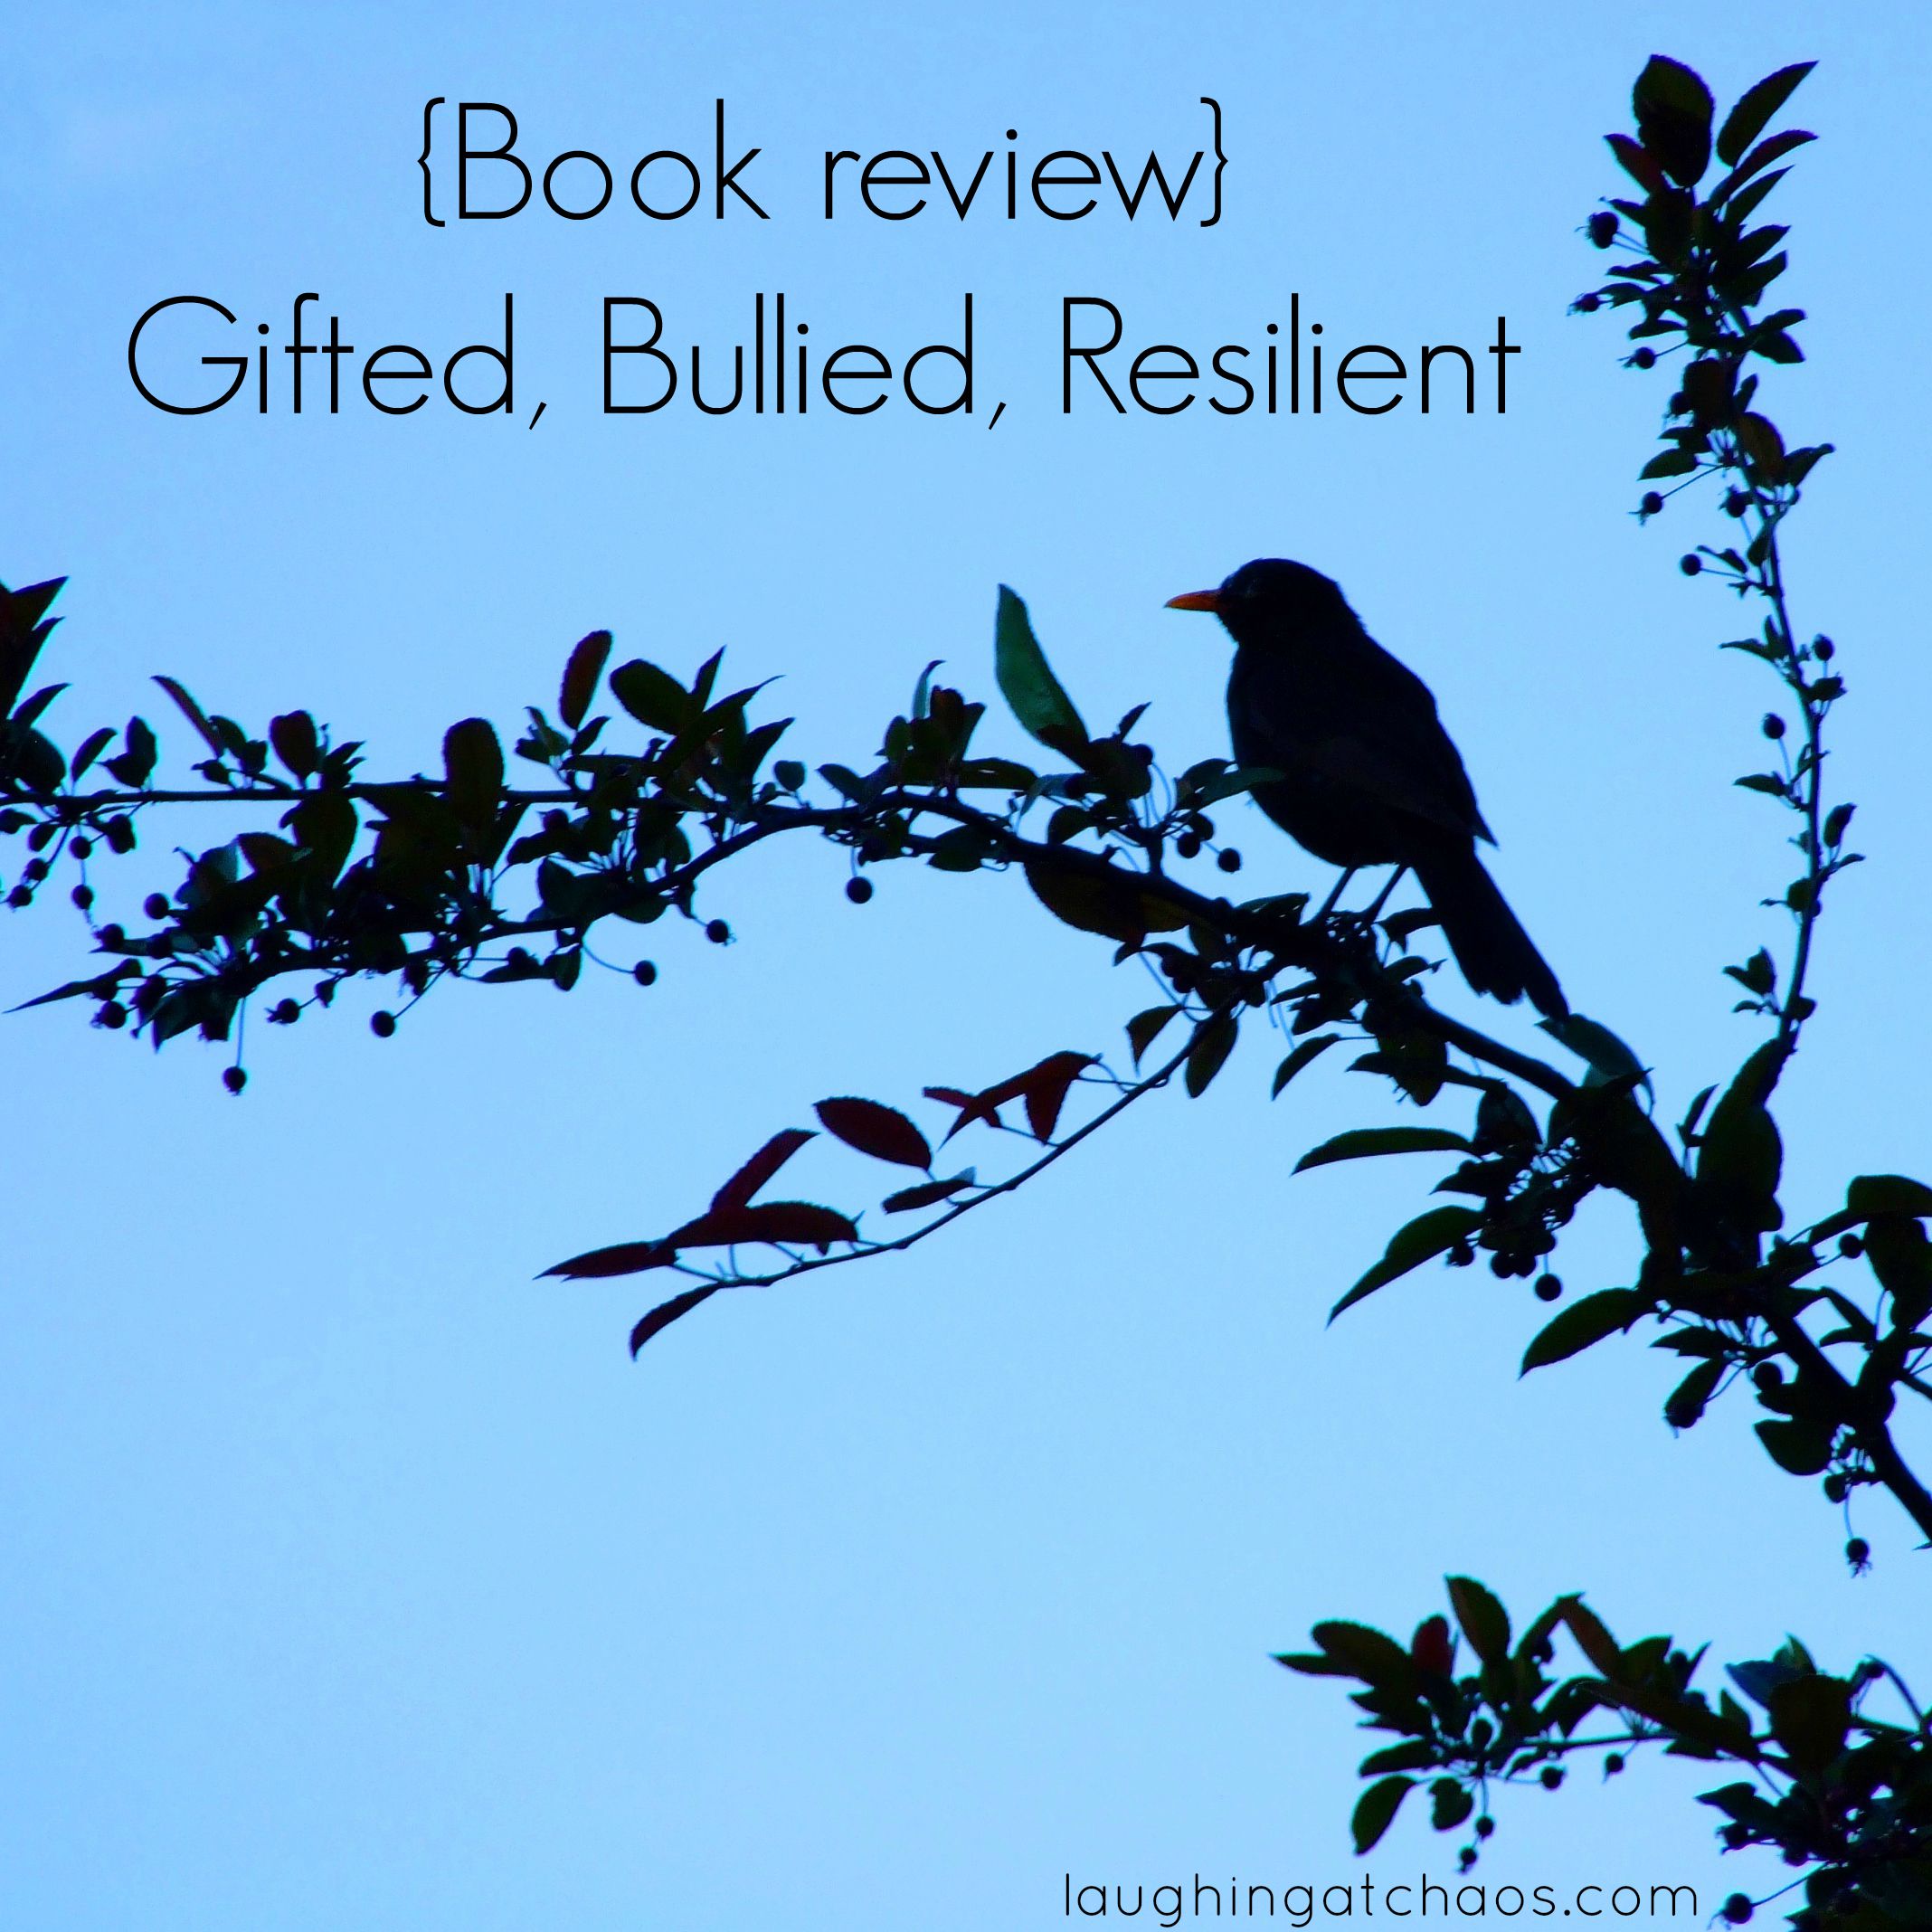 {Book review} Gifted, Bullied, Resilient